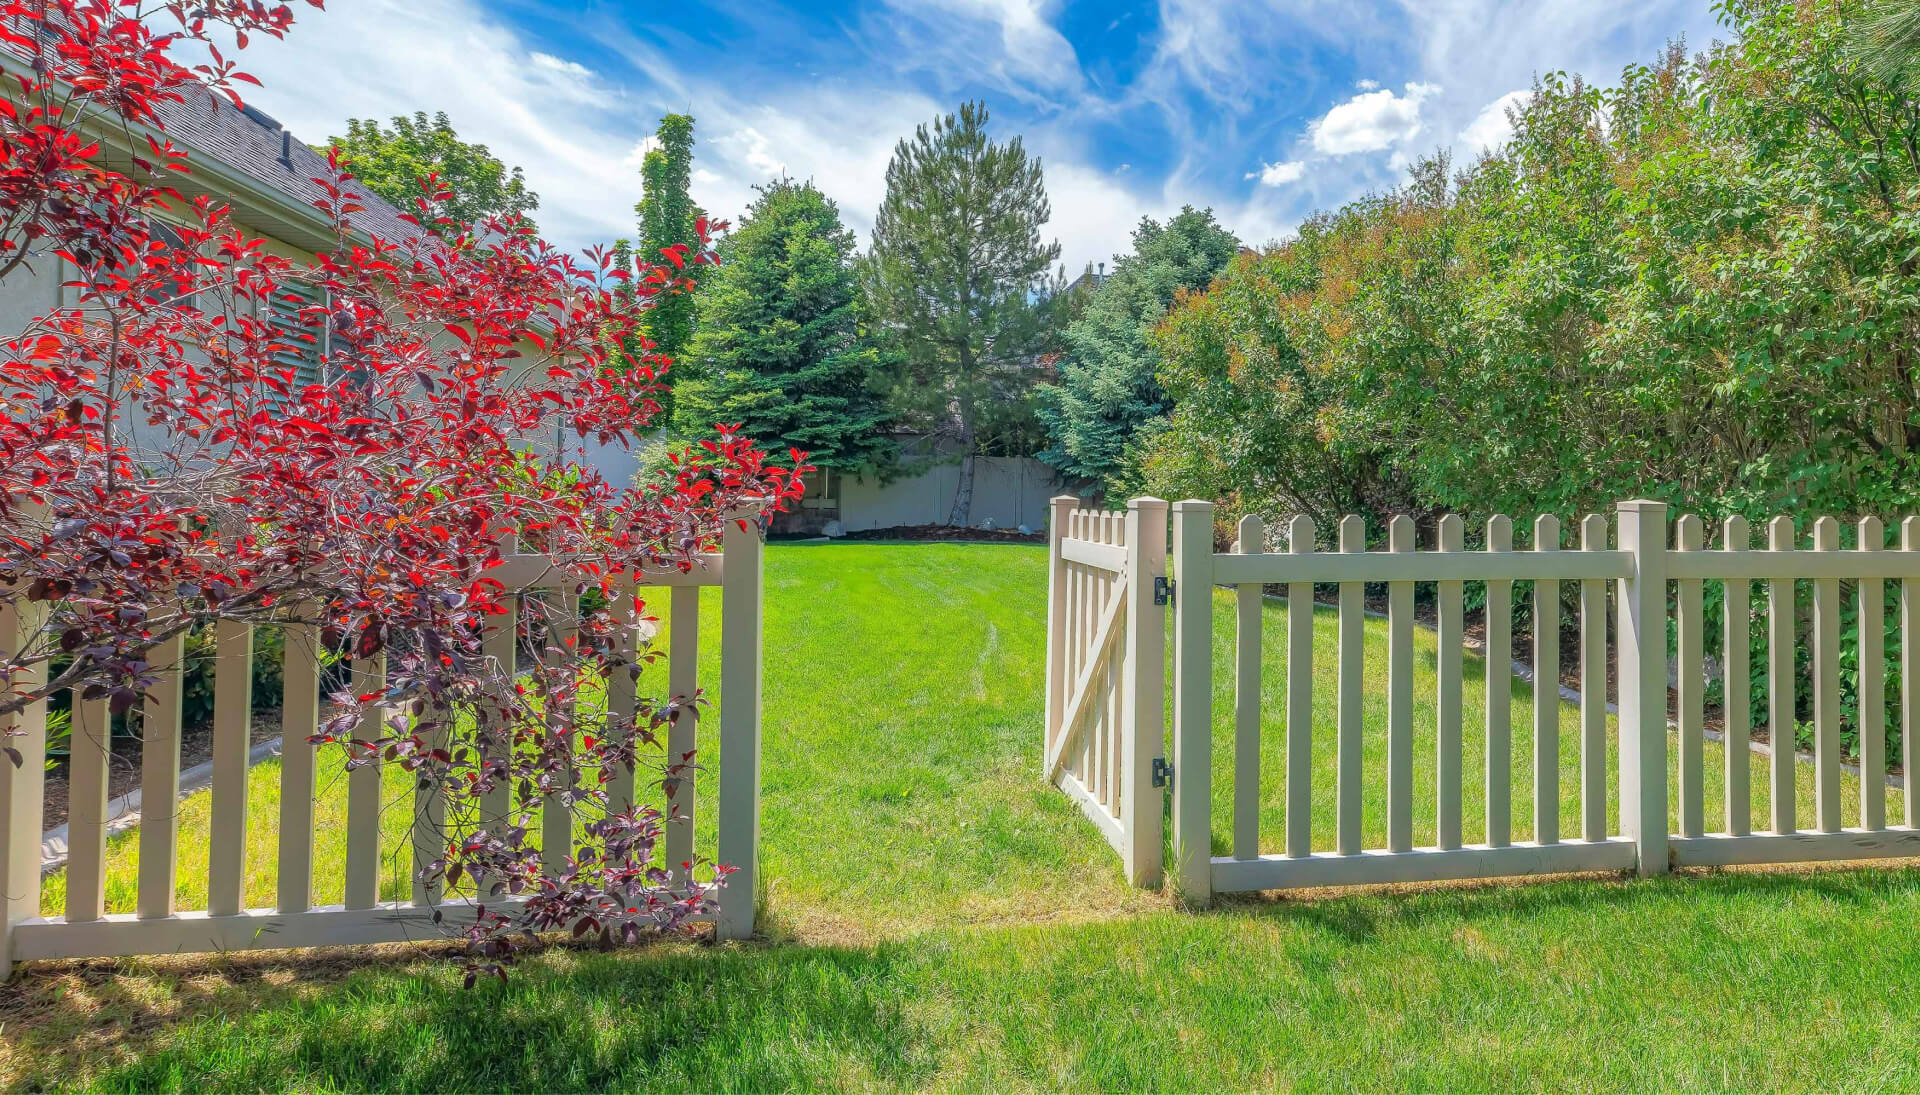 A functional fence gate providing access to a well-maintained backyard, surrounded by a wooden fence in Portland